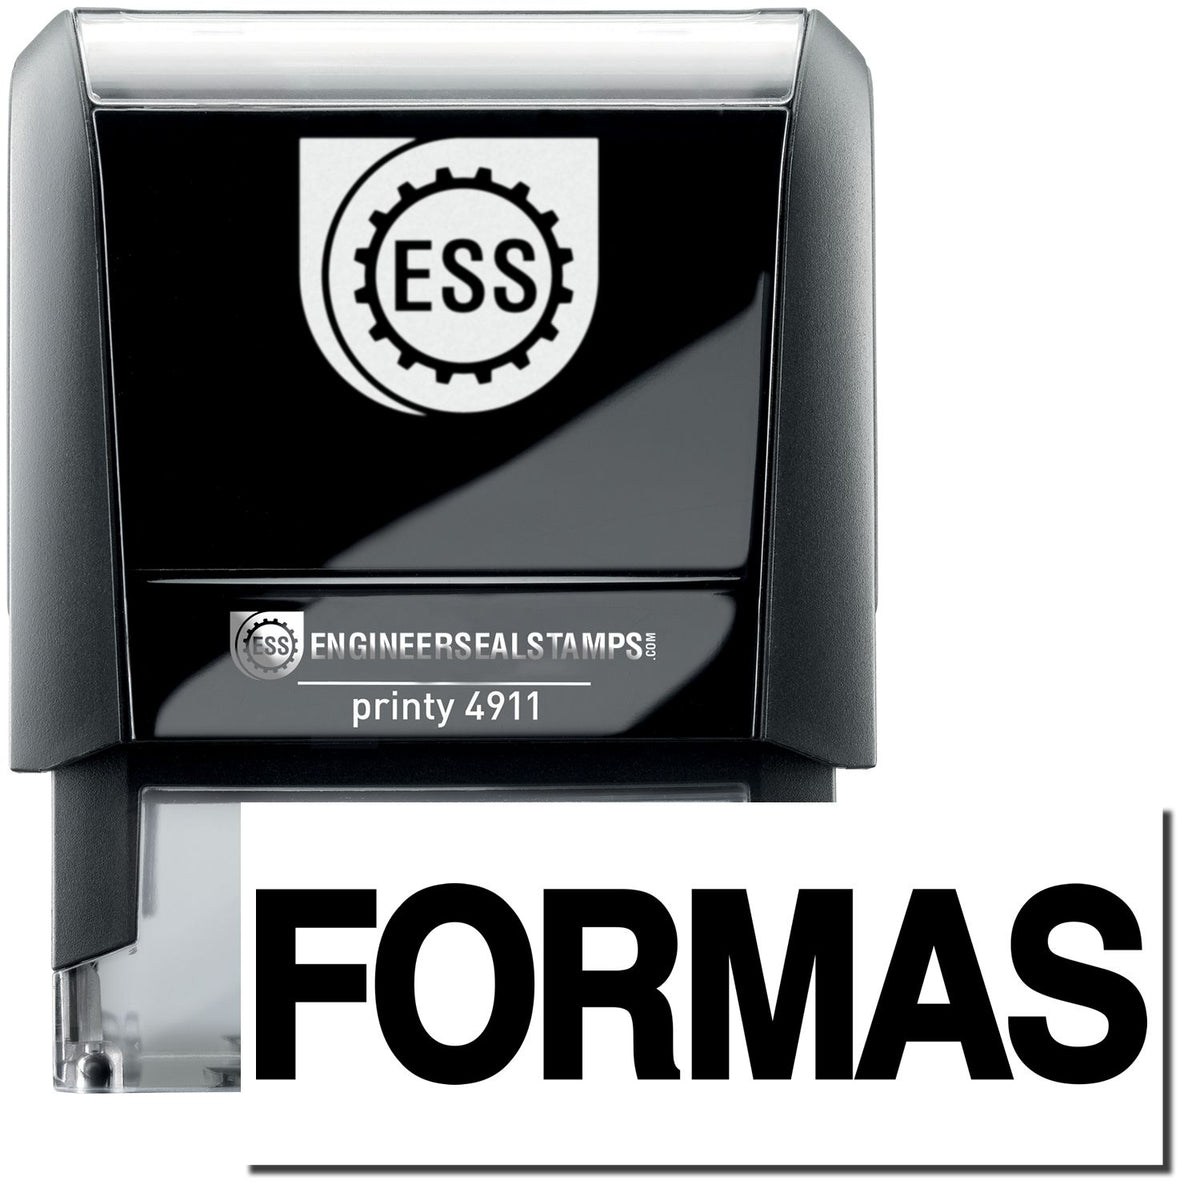 A self-inking stamp with a stamped image showing how the text &quot;FORMAS&quot; is displayed after stamping.